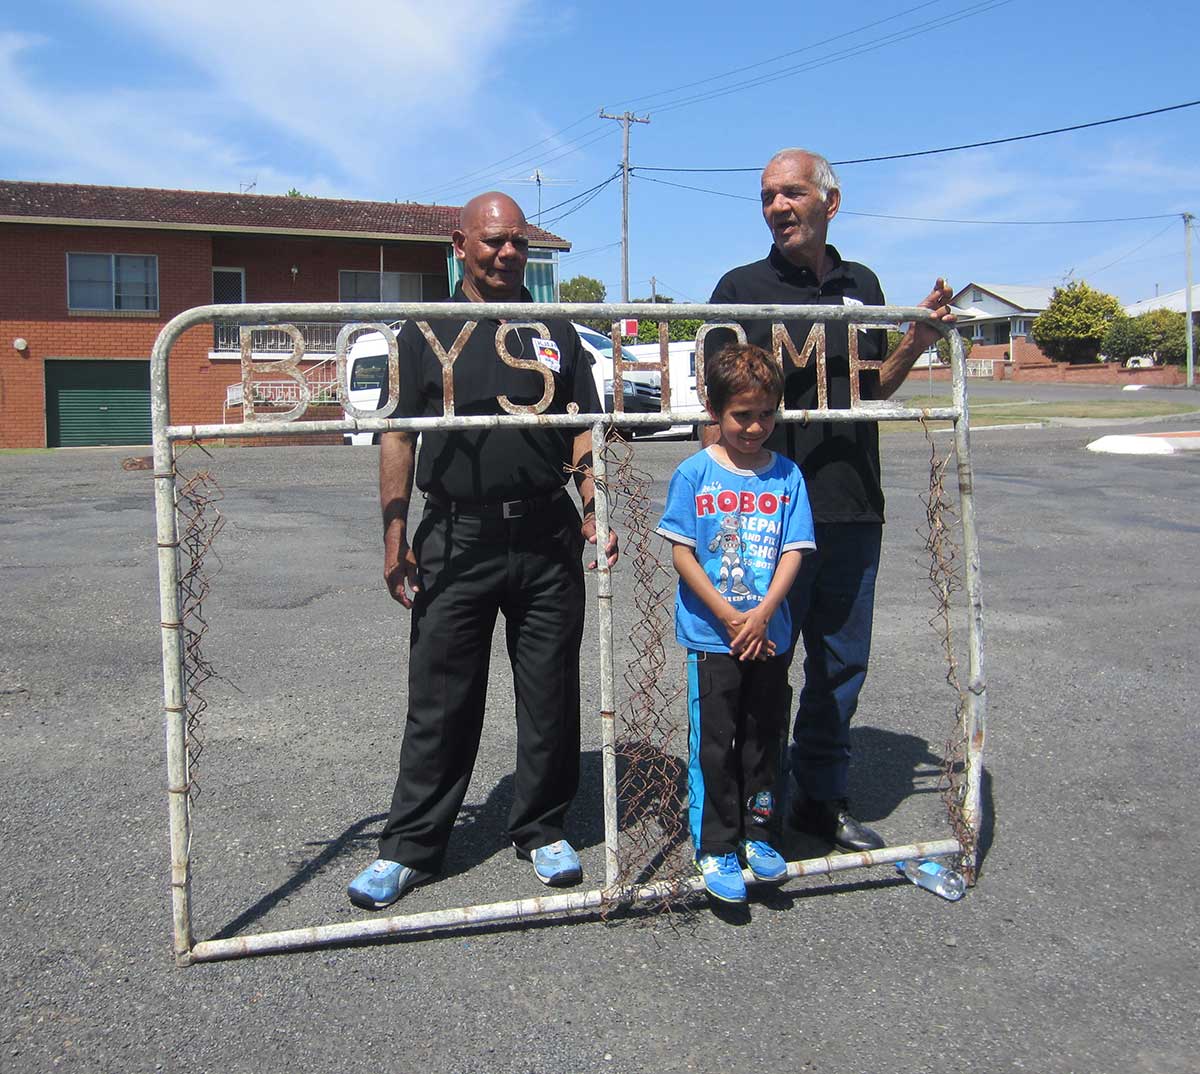 Colour photograph of two men and a child posing with an old metal fence with signage that reads: 